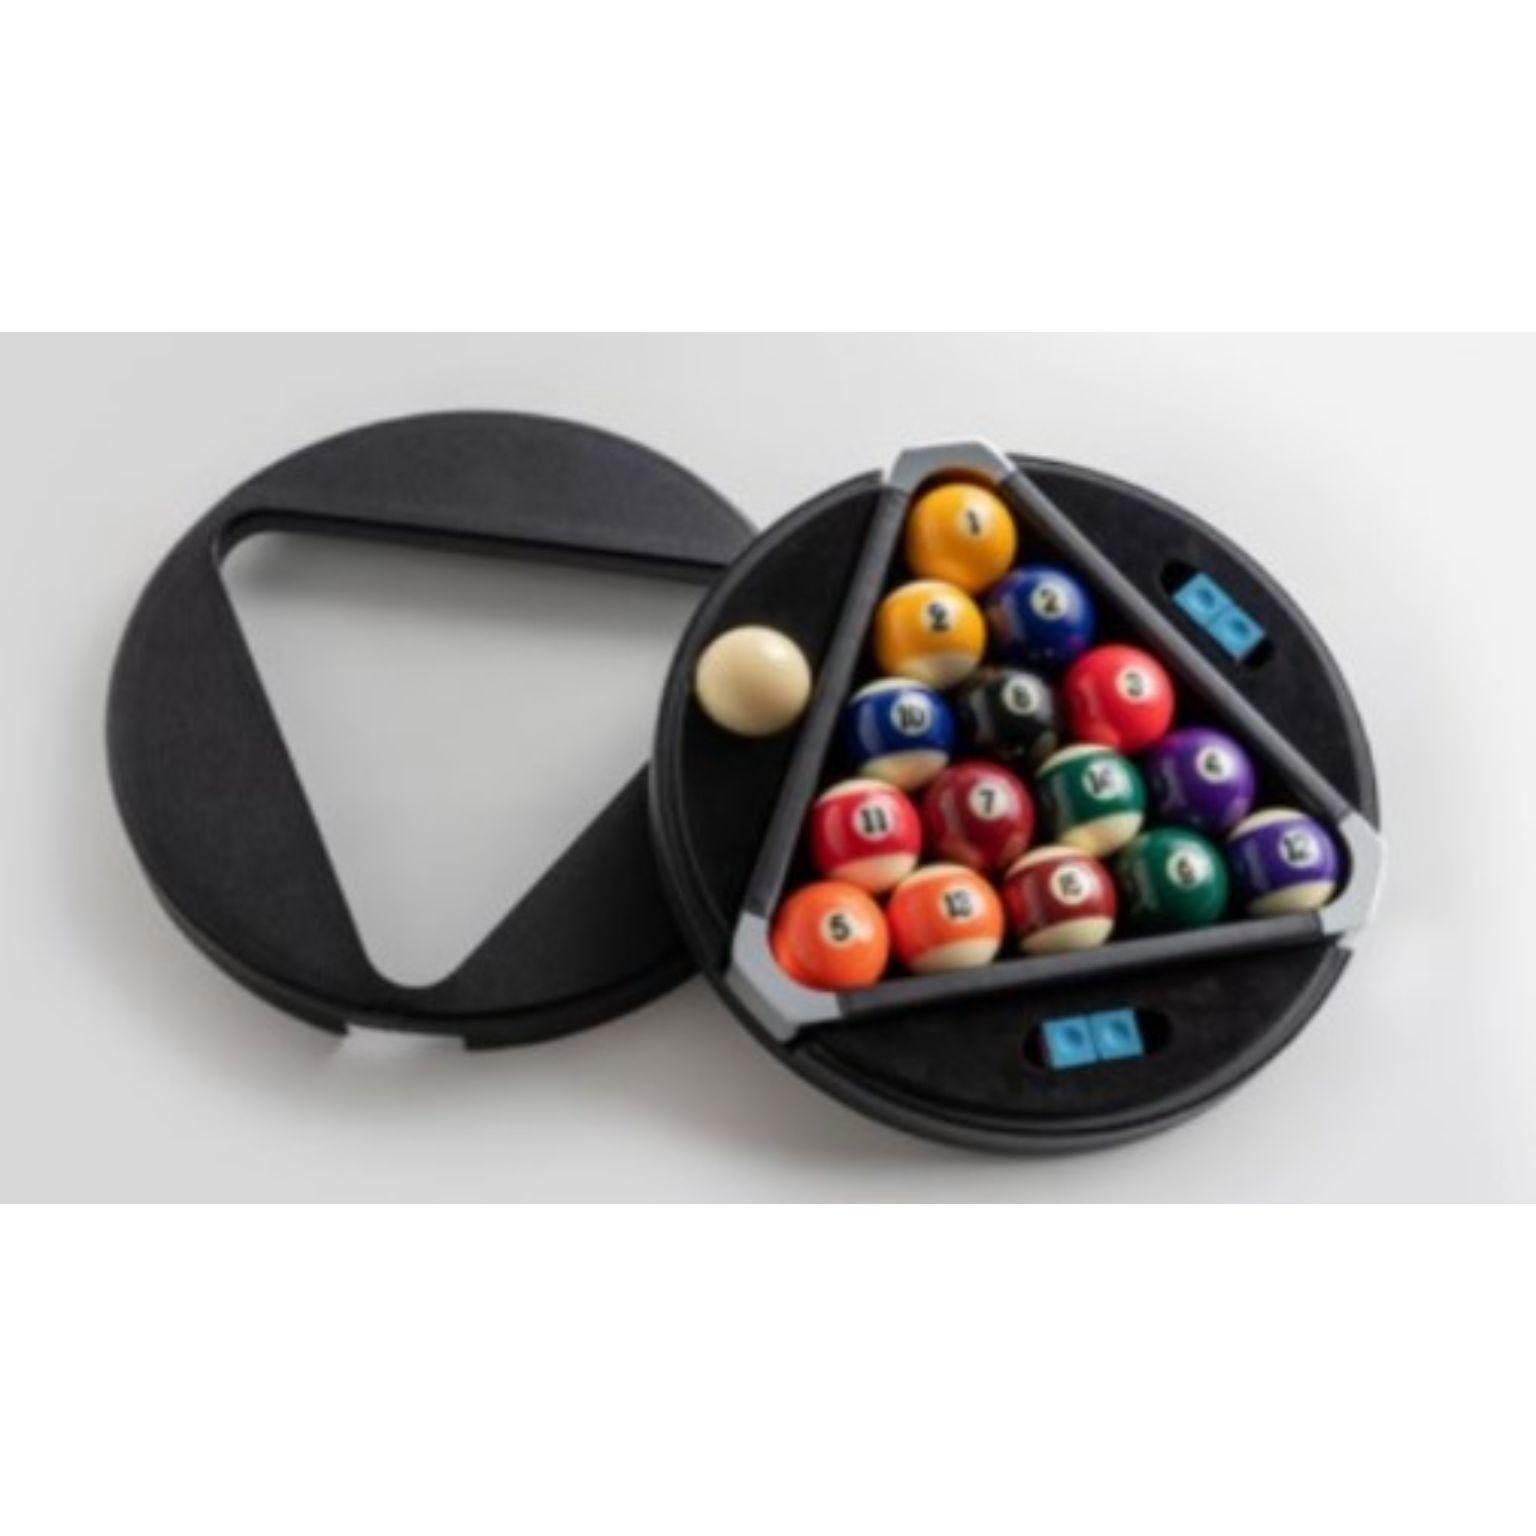 Filotto Accessories Billards Game Set by Impatia
Dimensions: D40 x Wx H6cm
Material:Handcrafted from leather with glass,detailing and chrome components

Filotto is the first product created for Impatia’s collection, that gives new life, new